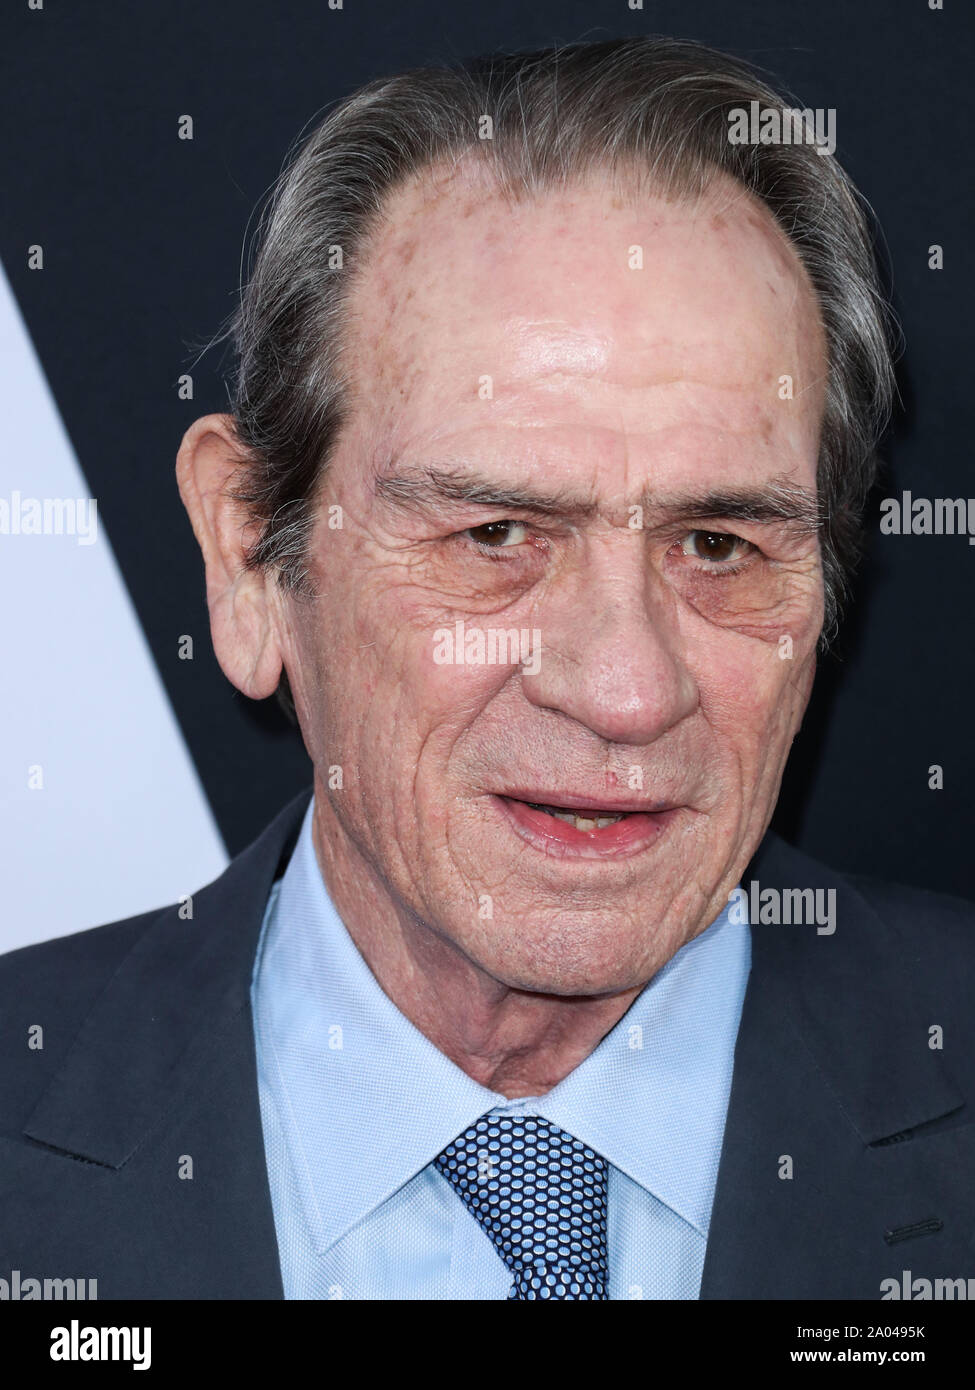 HOLLYWOOD, LOS ANGELES, CALIFORNIA, USA - SEPTEMBER 18: Actor Tommy Lee Jones arrives at the Los Angeles Premiere Of 20th Century Fox's 'Ad Astra' held at ArcLight Cinemas Hollywood Cinerama Dome on August 18, 2019 in Hollywood, Los Angeles, California, United States. (Photo by Xavier Collin/Image Press Agency) Stock Photo